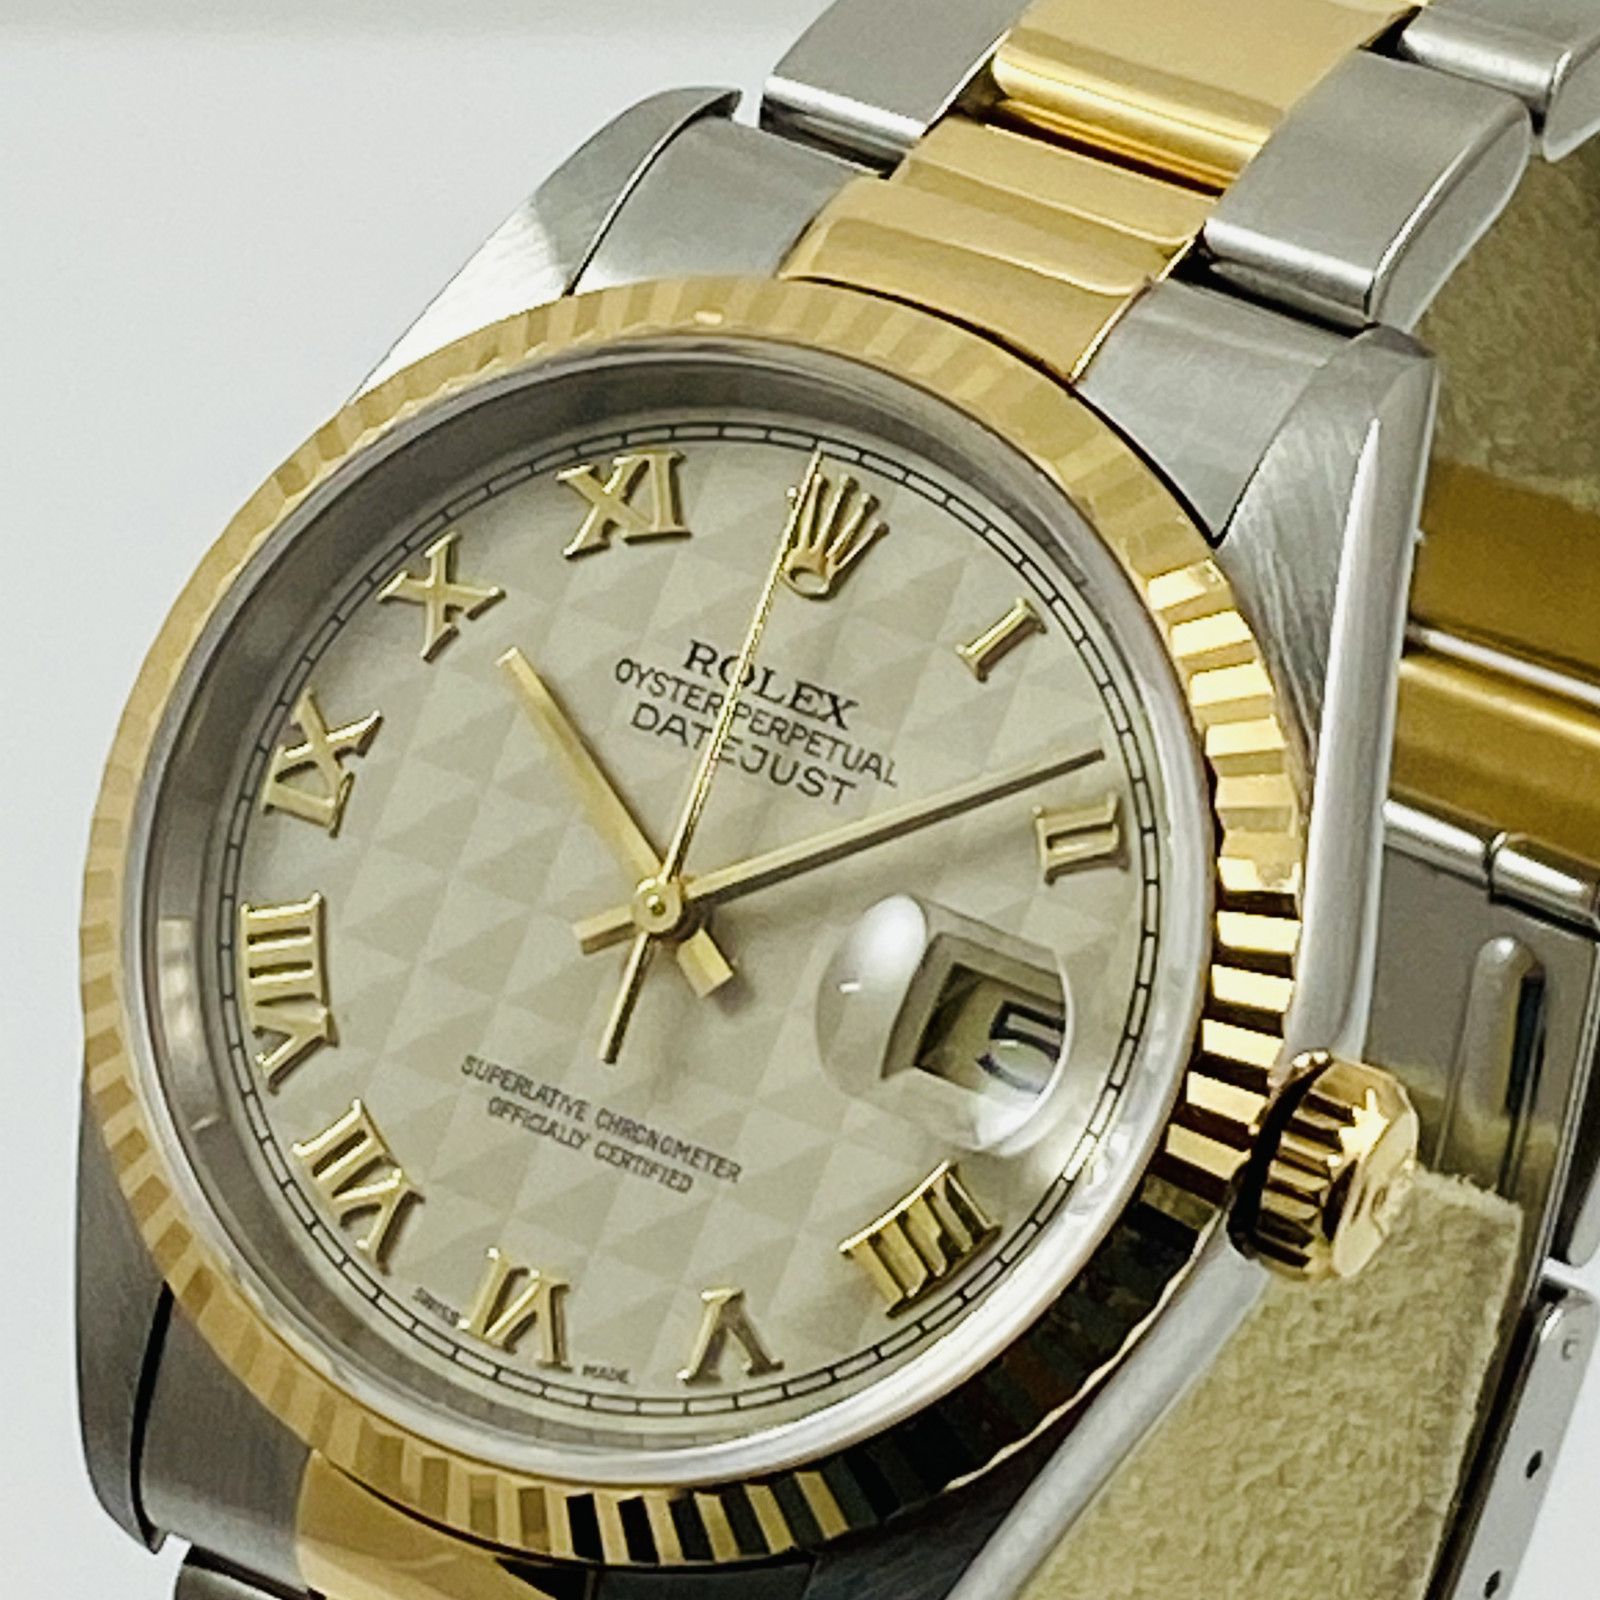 Rolex Datejust Ref. 16233 with Pyramid Dial